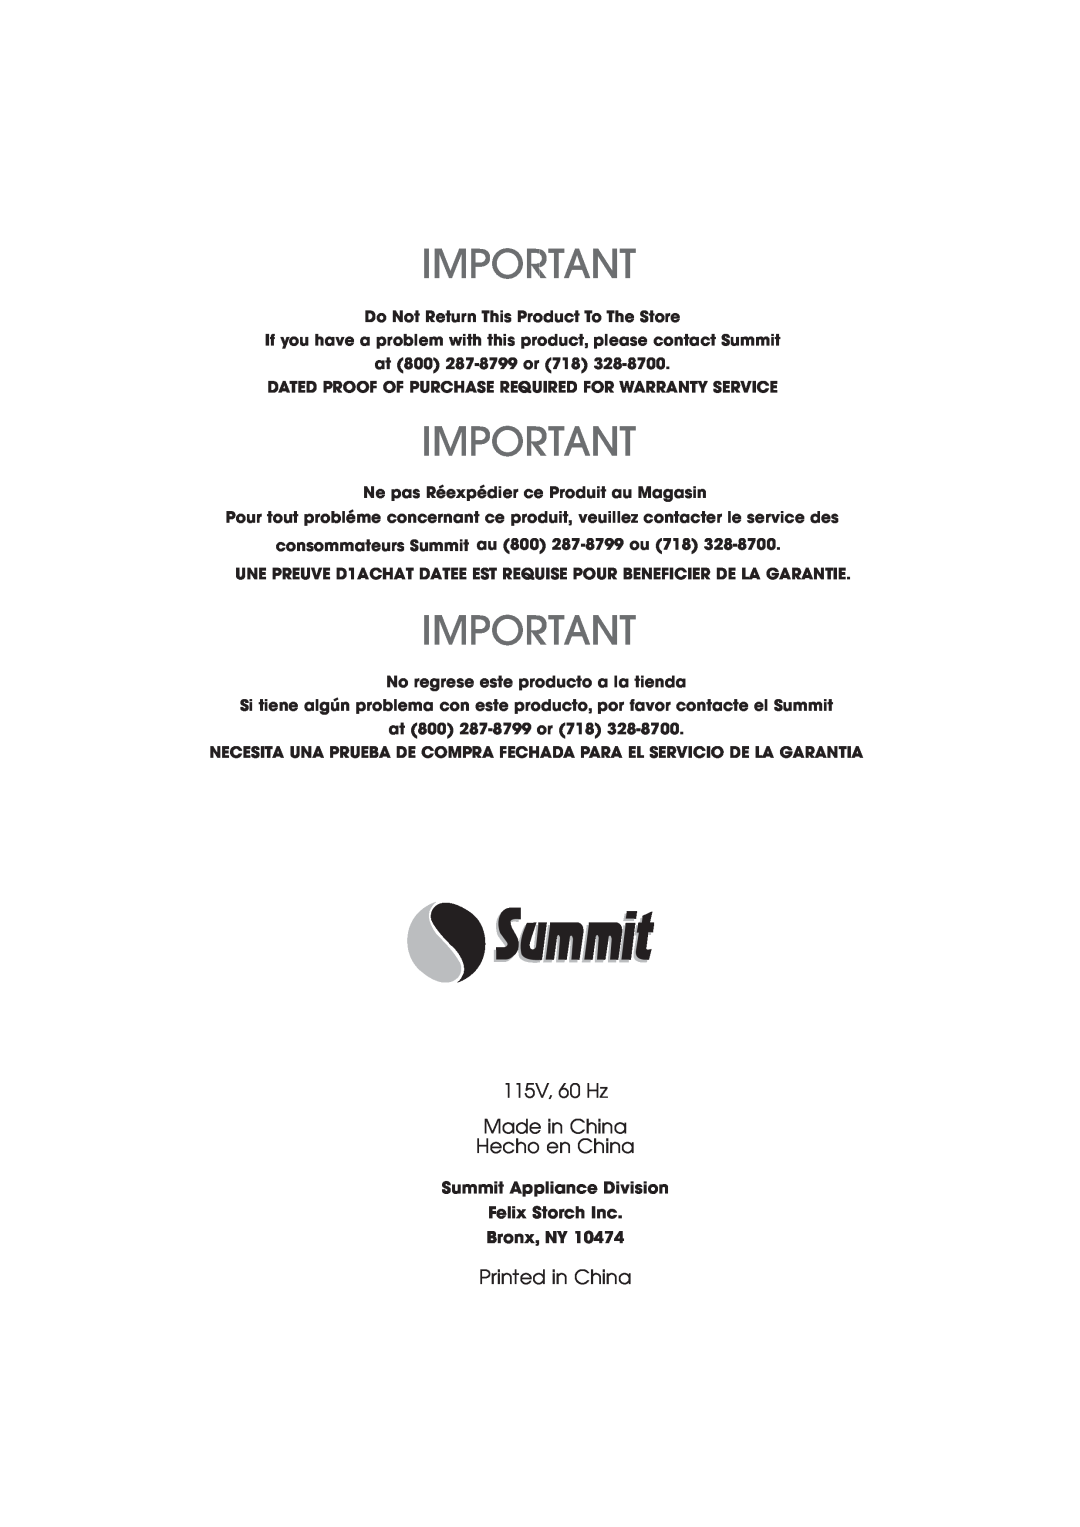 Summit SPW1200P user manual 115V, 60 Hz Made in China Hecho en China, Printed in China 